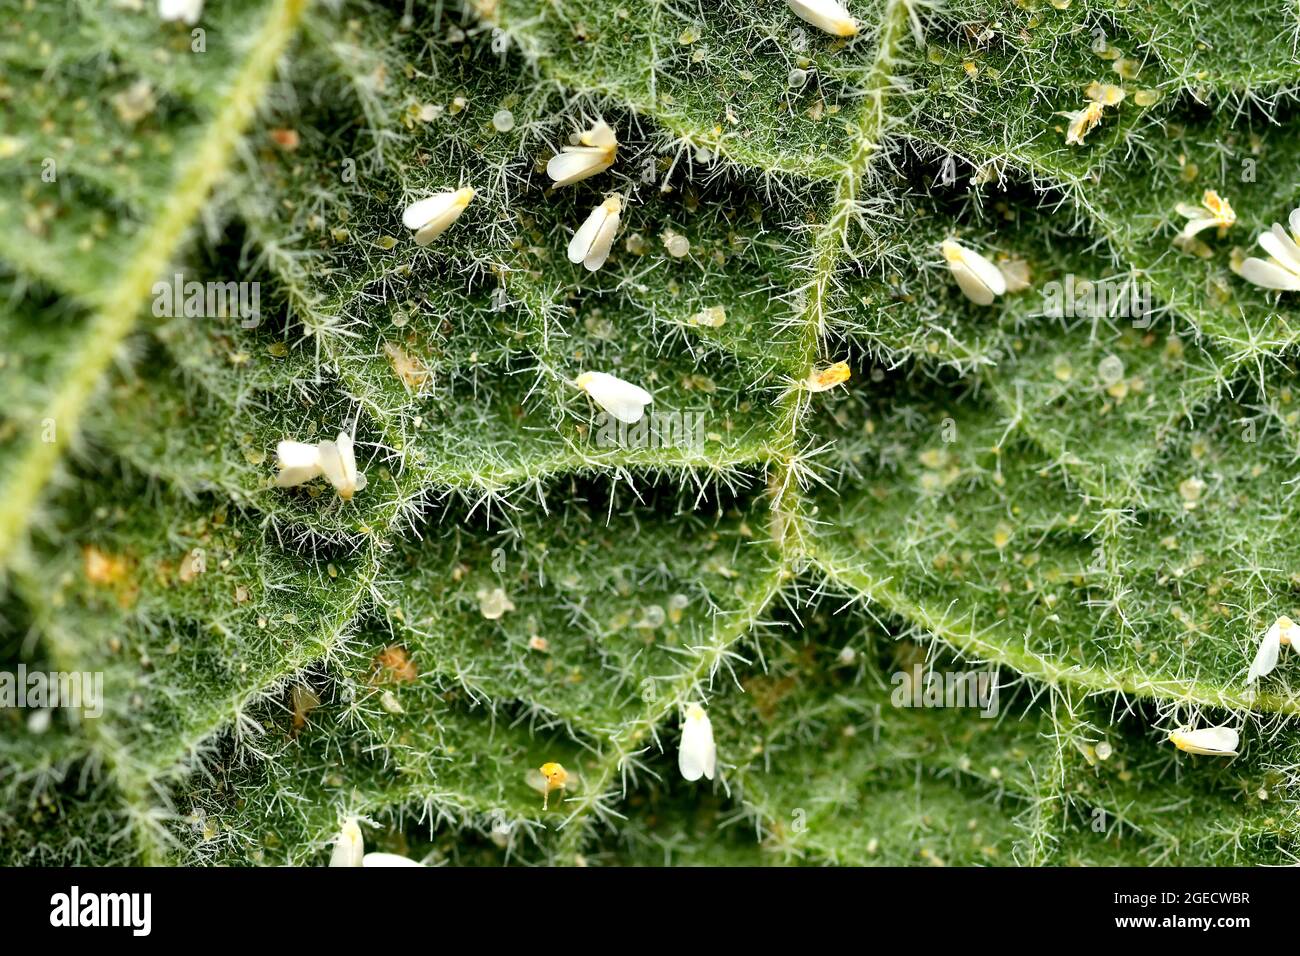 greenhouse whiteflies on a mallow leaf Stock Photo